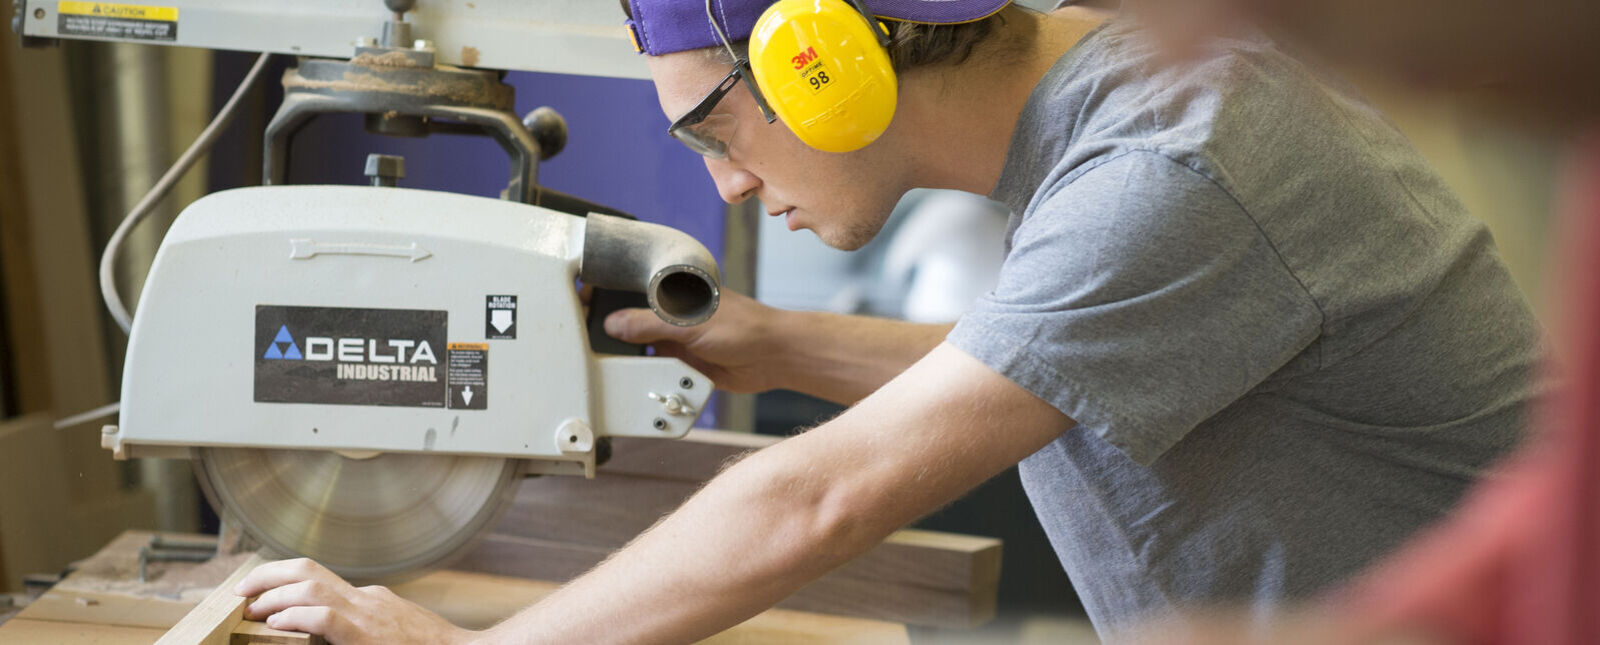 A male student wearing ear protection cuts into a piece of wood using a table saw.